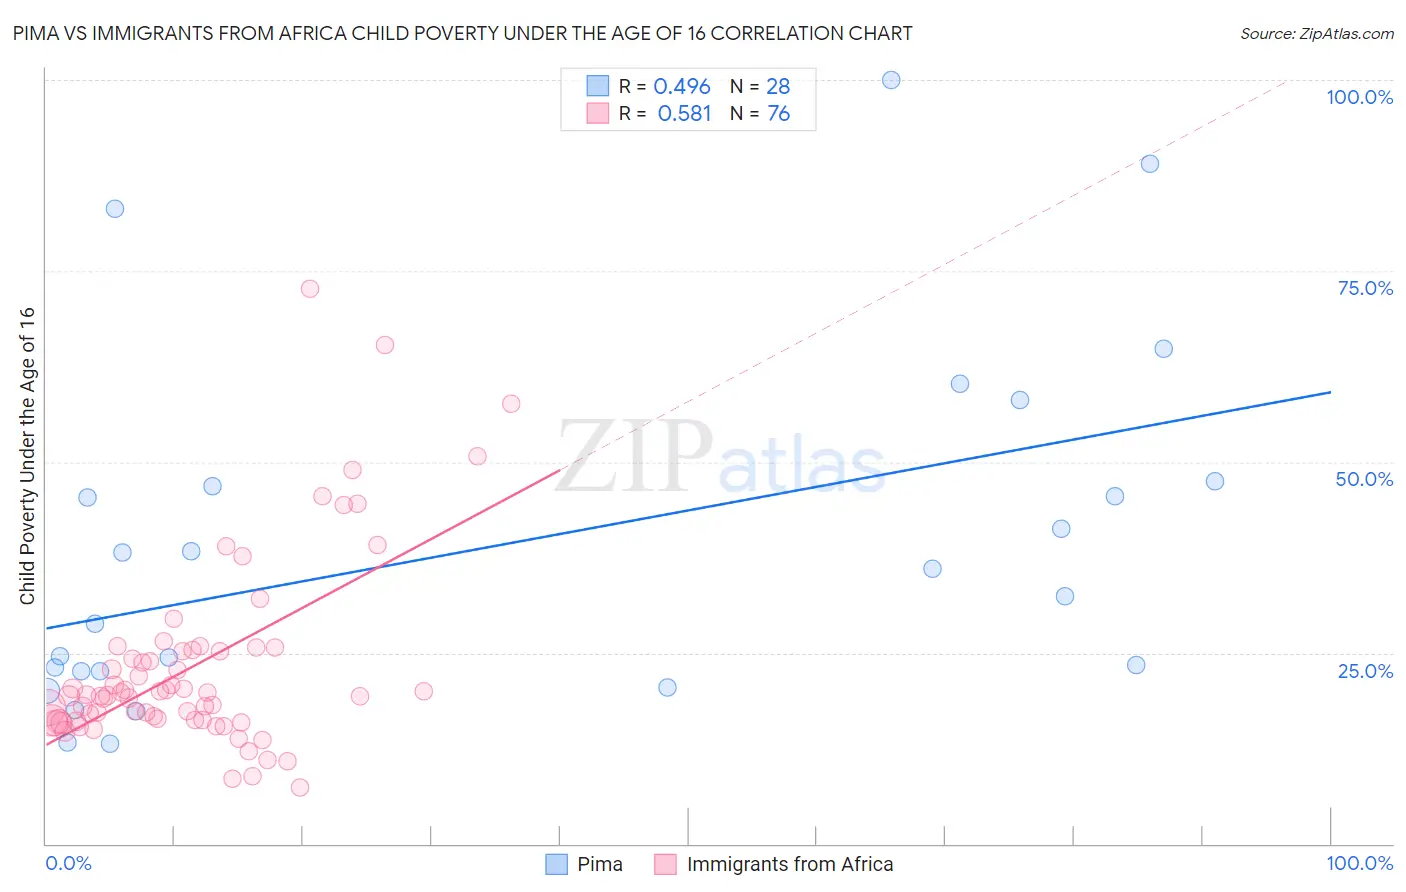 Pima vs Immigrants from Africa Child Poverty Under the Age of 16